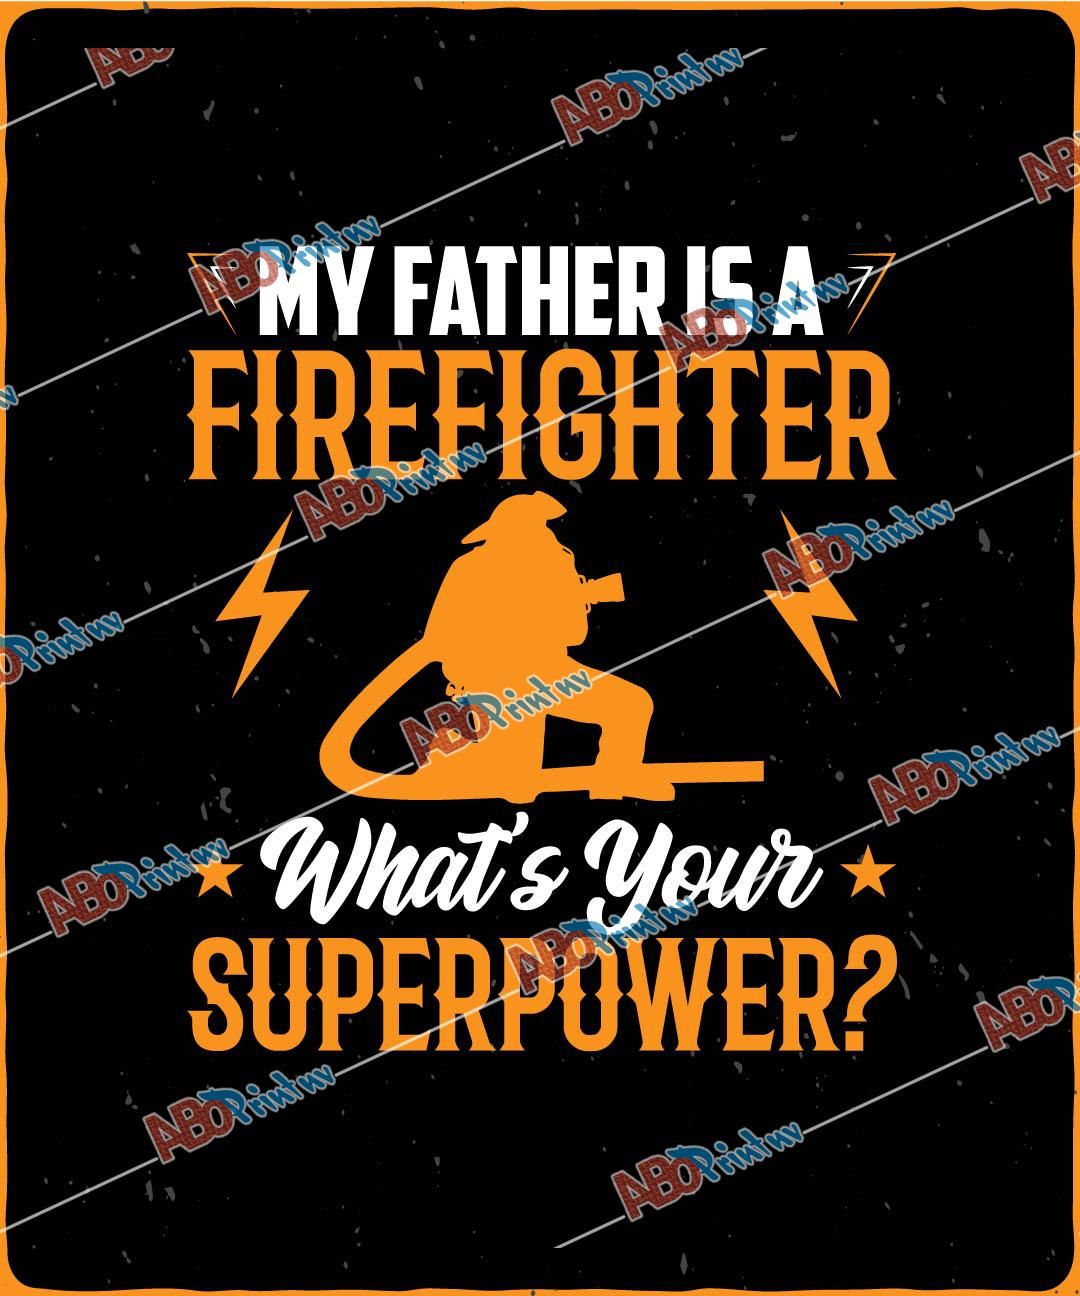 My father is a firefighter whats your superpower.jpg